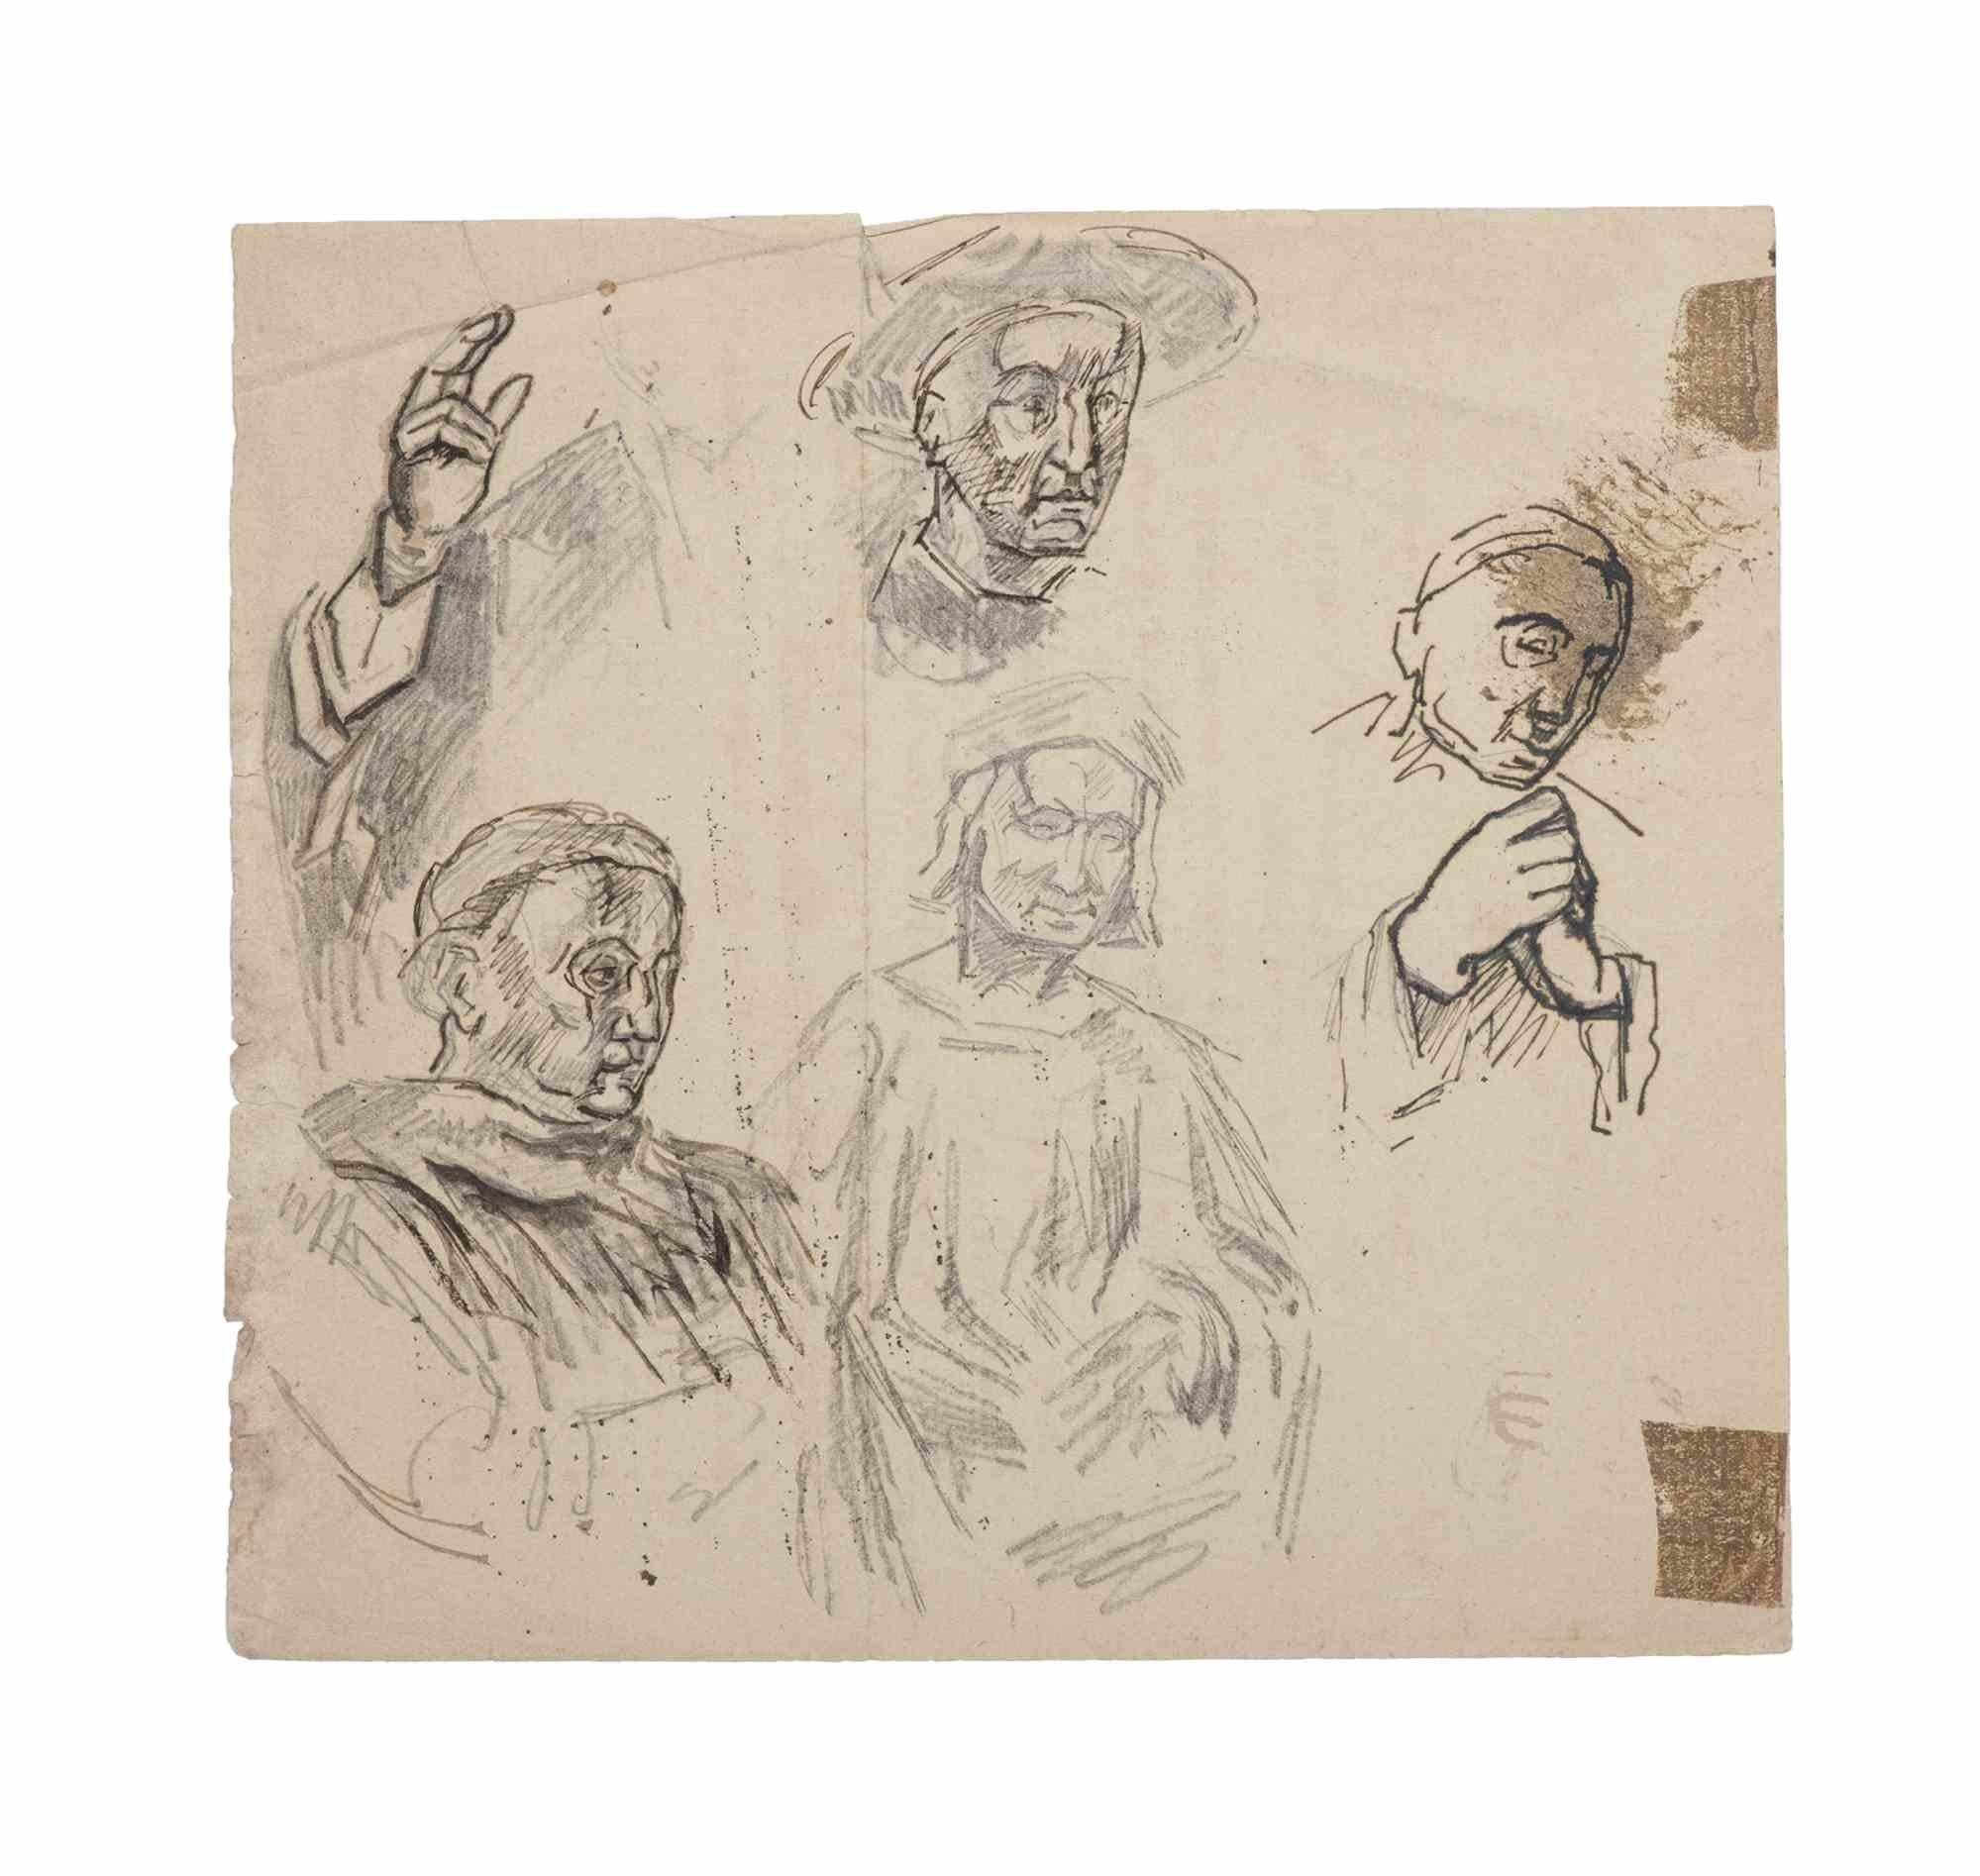 Unknown Figurative Art - Figures - Original Pencil on Paper - Early 20th Century